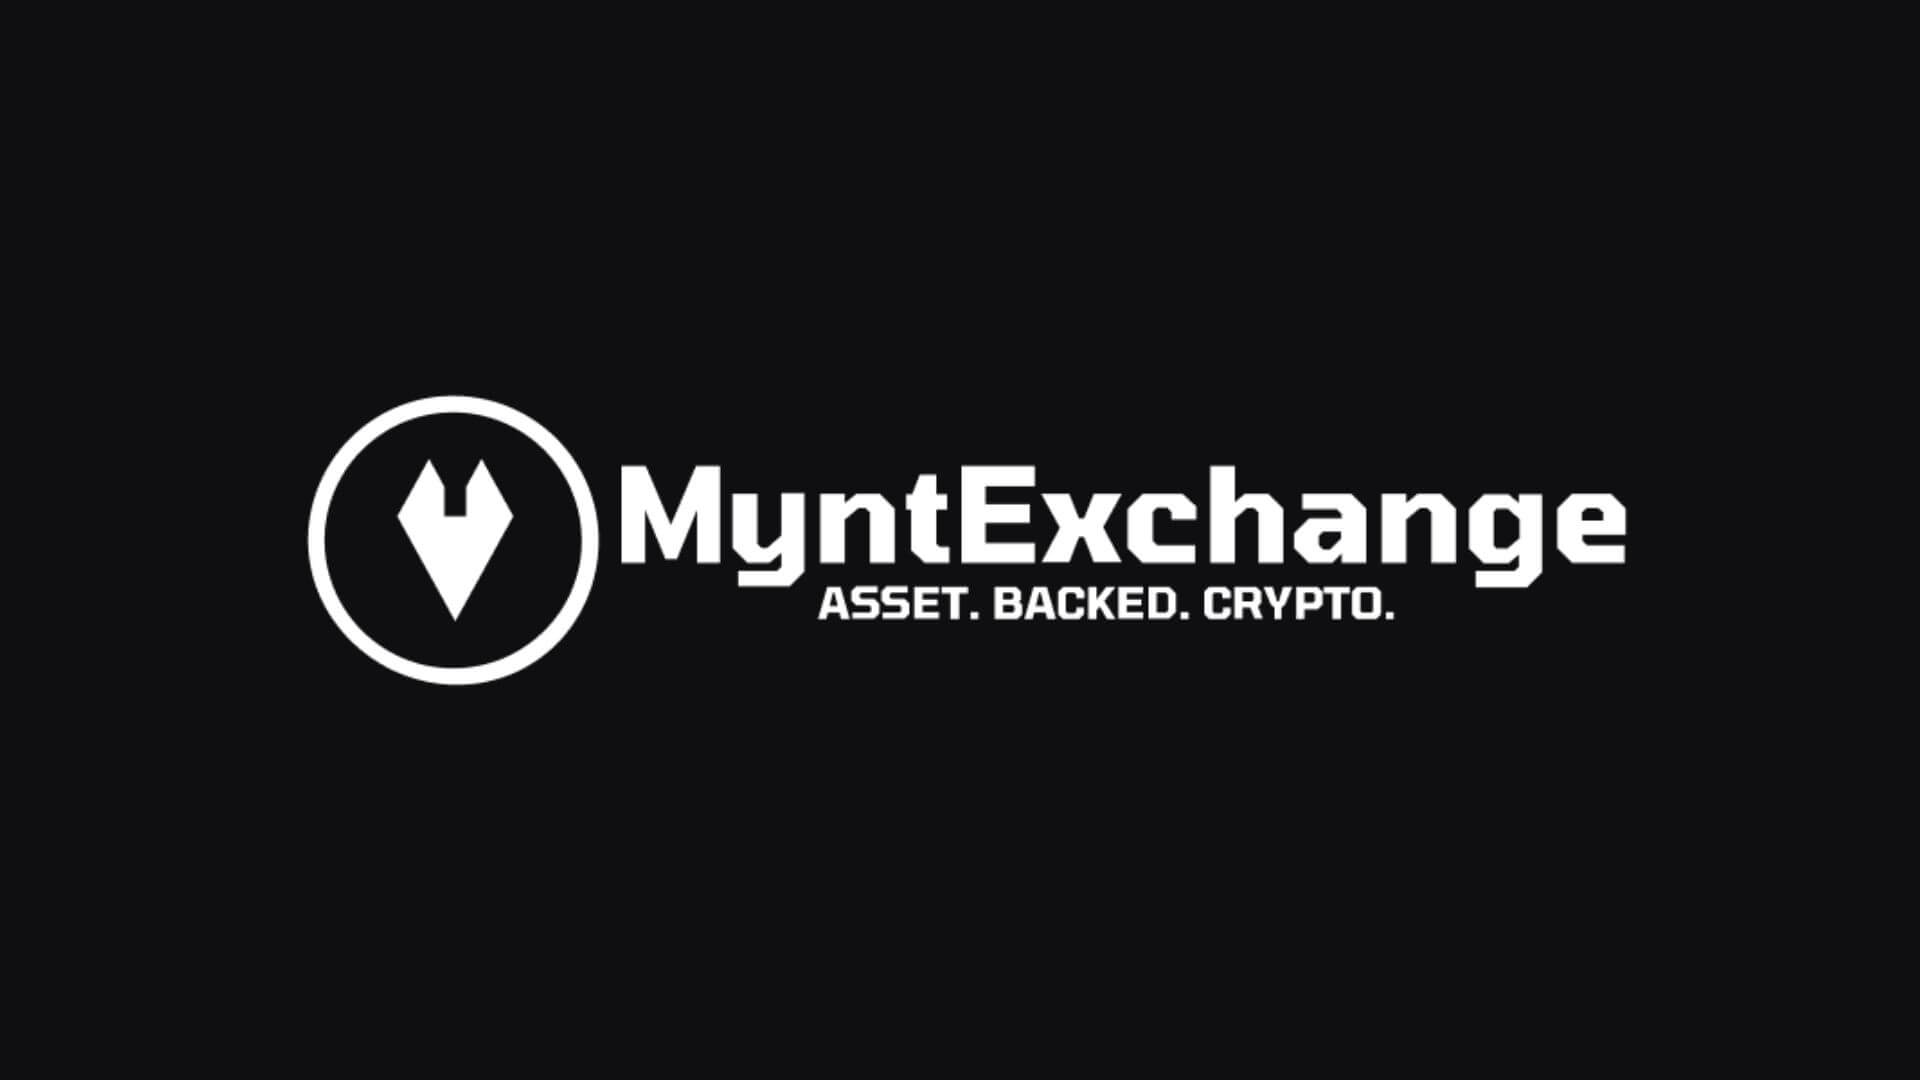 Myntexchange Tokenized Shares Offer Opportunity To Invest in Unlisted Companies